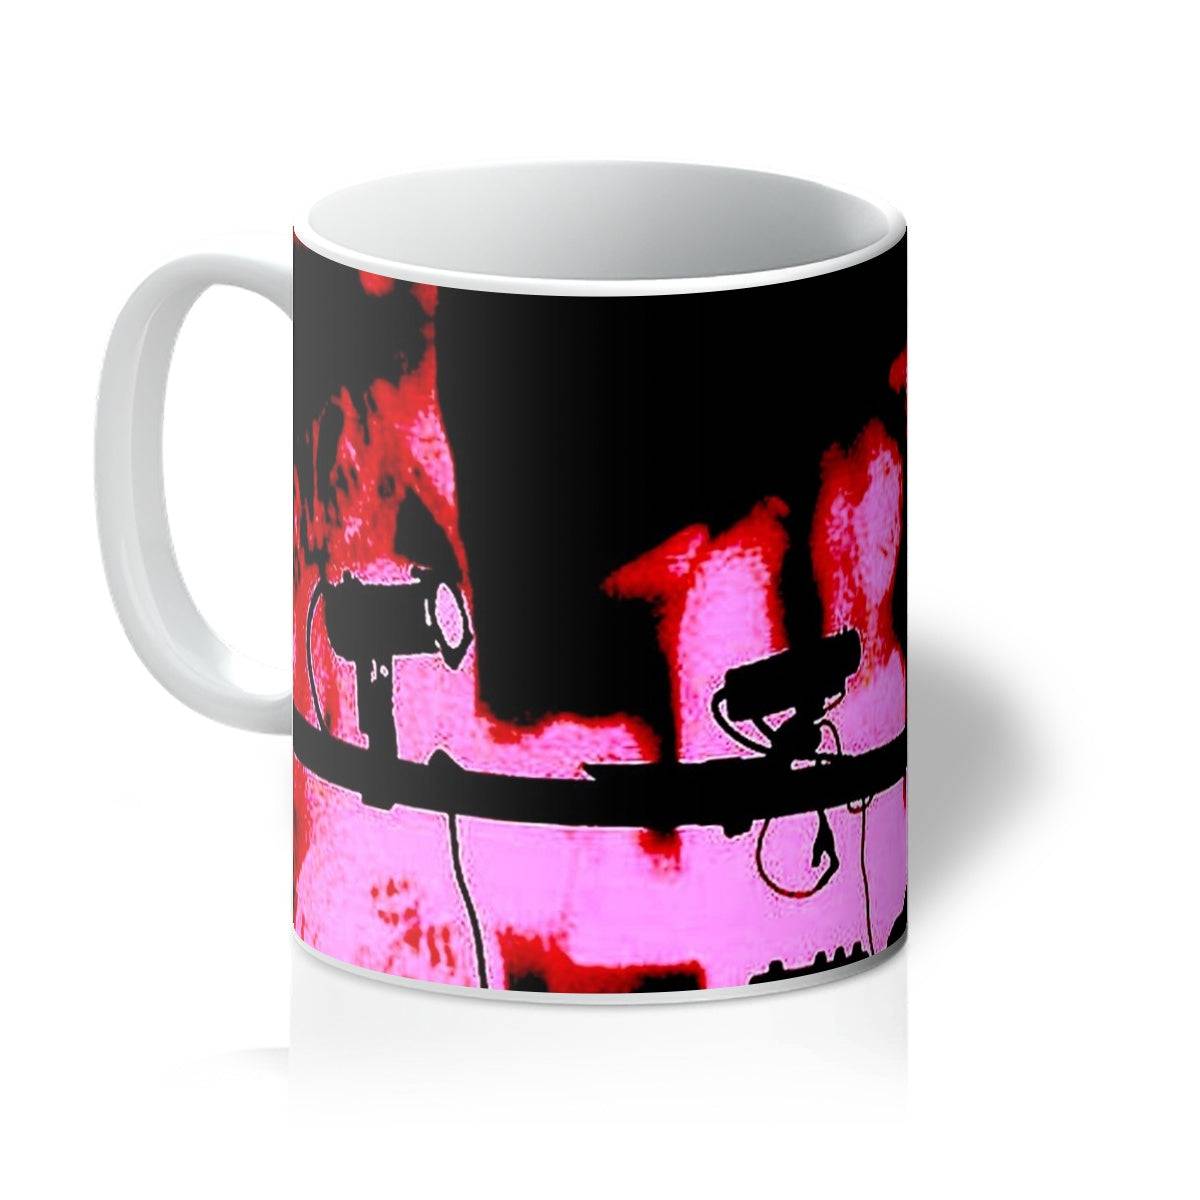 Dancing With The Devils Art Gifts Mug-Mugs-Abstract & Impressionistic Art Gallery-11oz-White-Paintings, Prints, Homeware, Art Gifts From Scotland By Scottish Artist Kevin Hunter